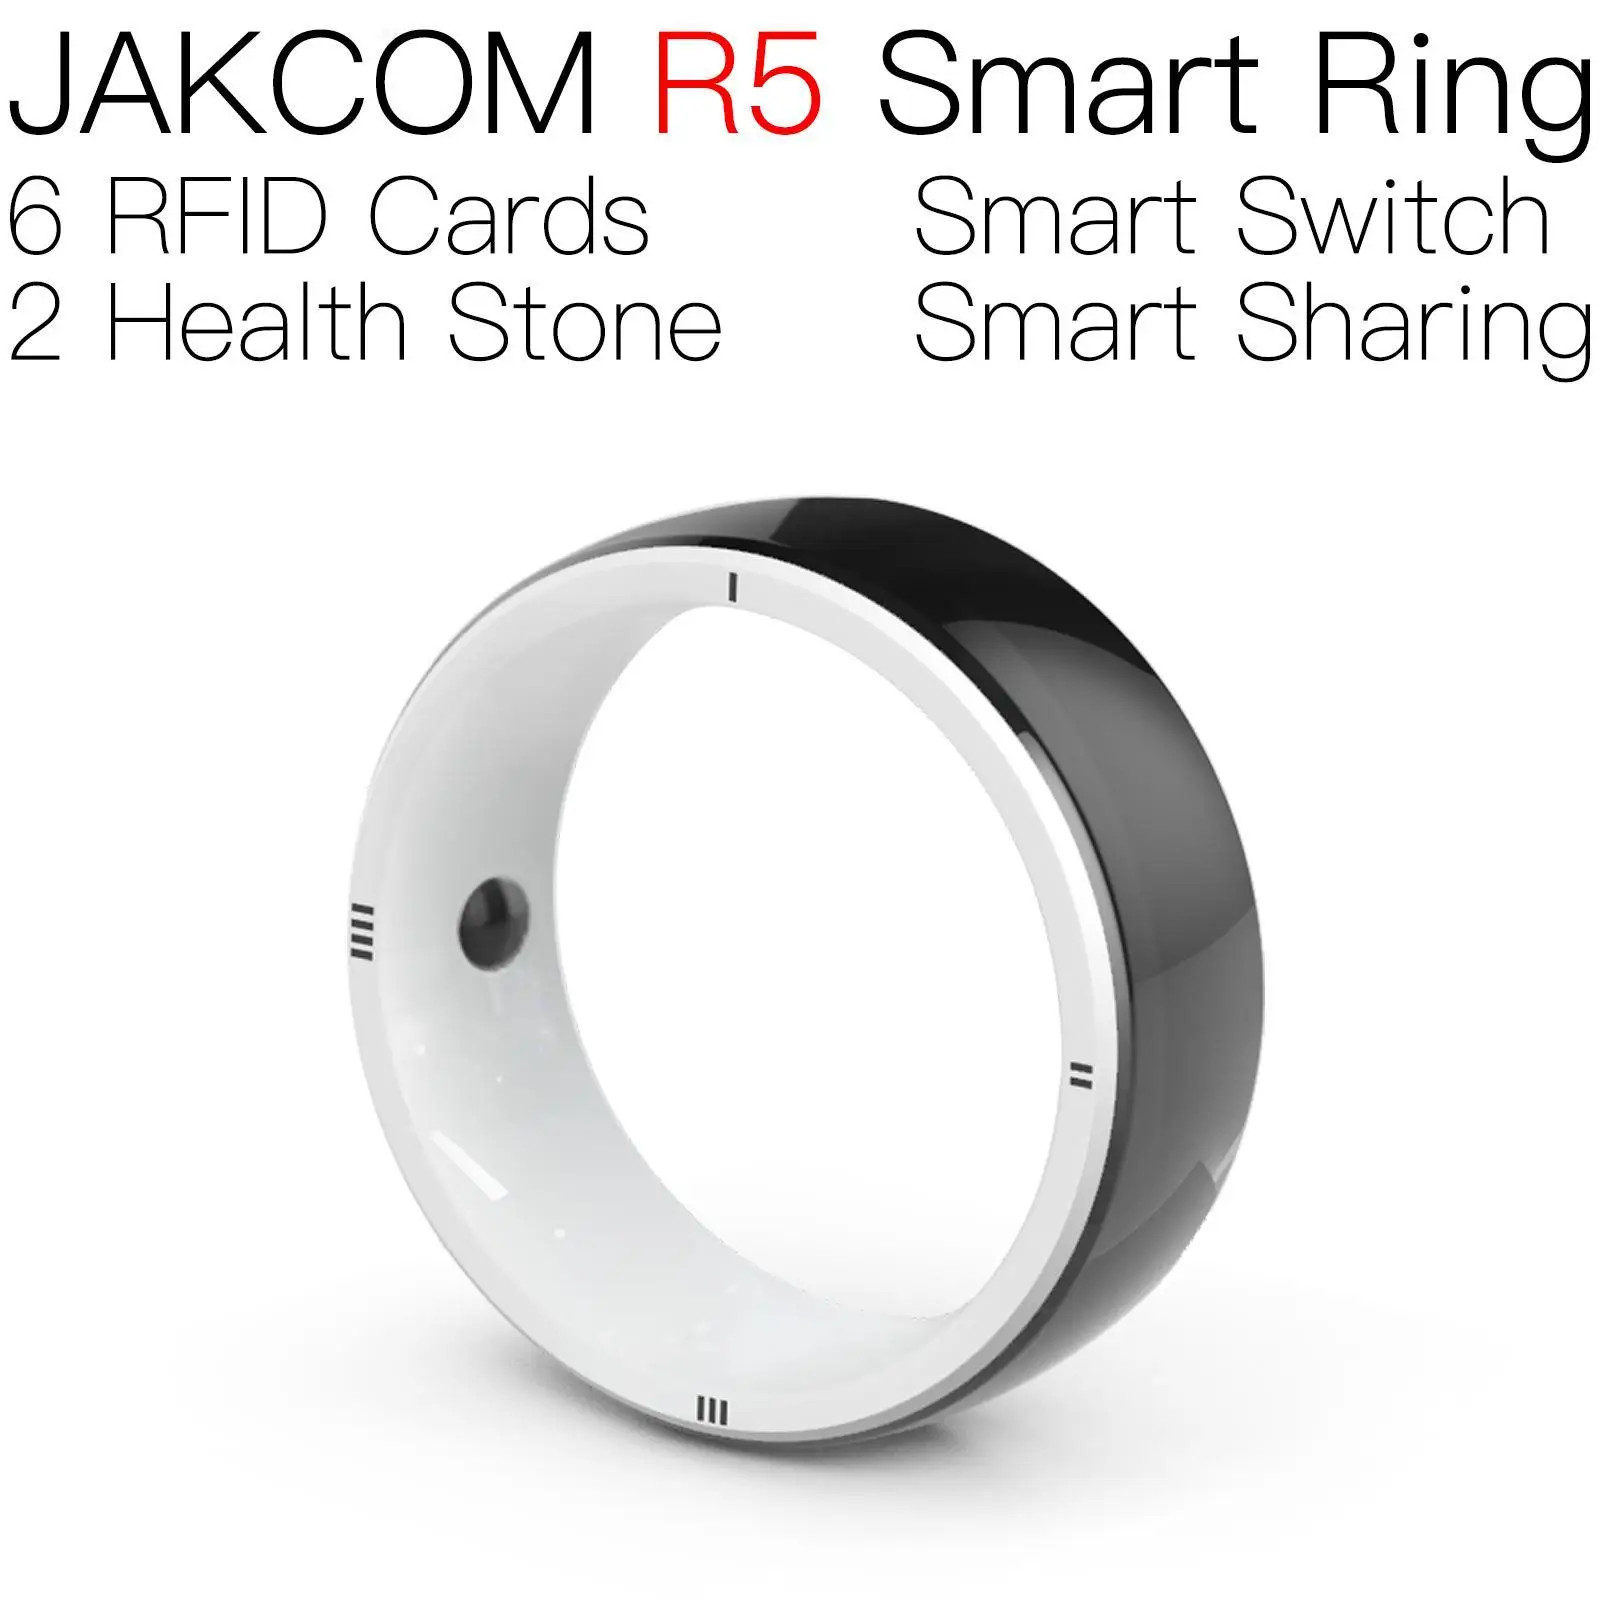 

JAKCOM R5 Smart Ring New product as led tag rfid uhf access 125khz server ntag card chips nfc nfs audio 125 khz rewritable